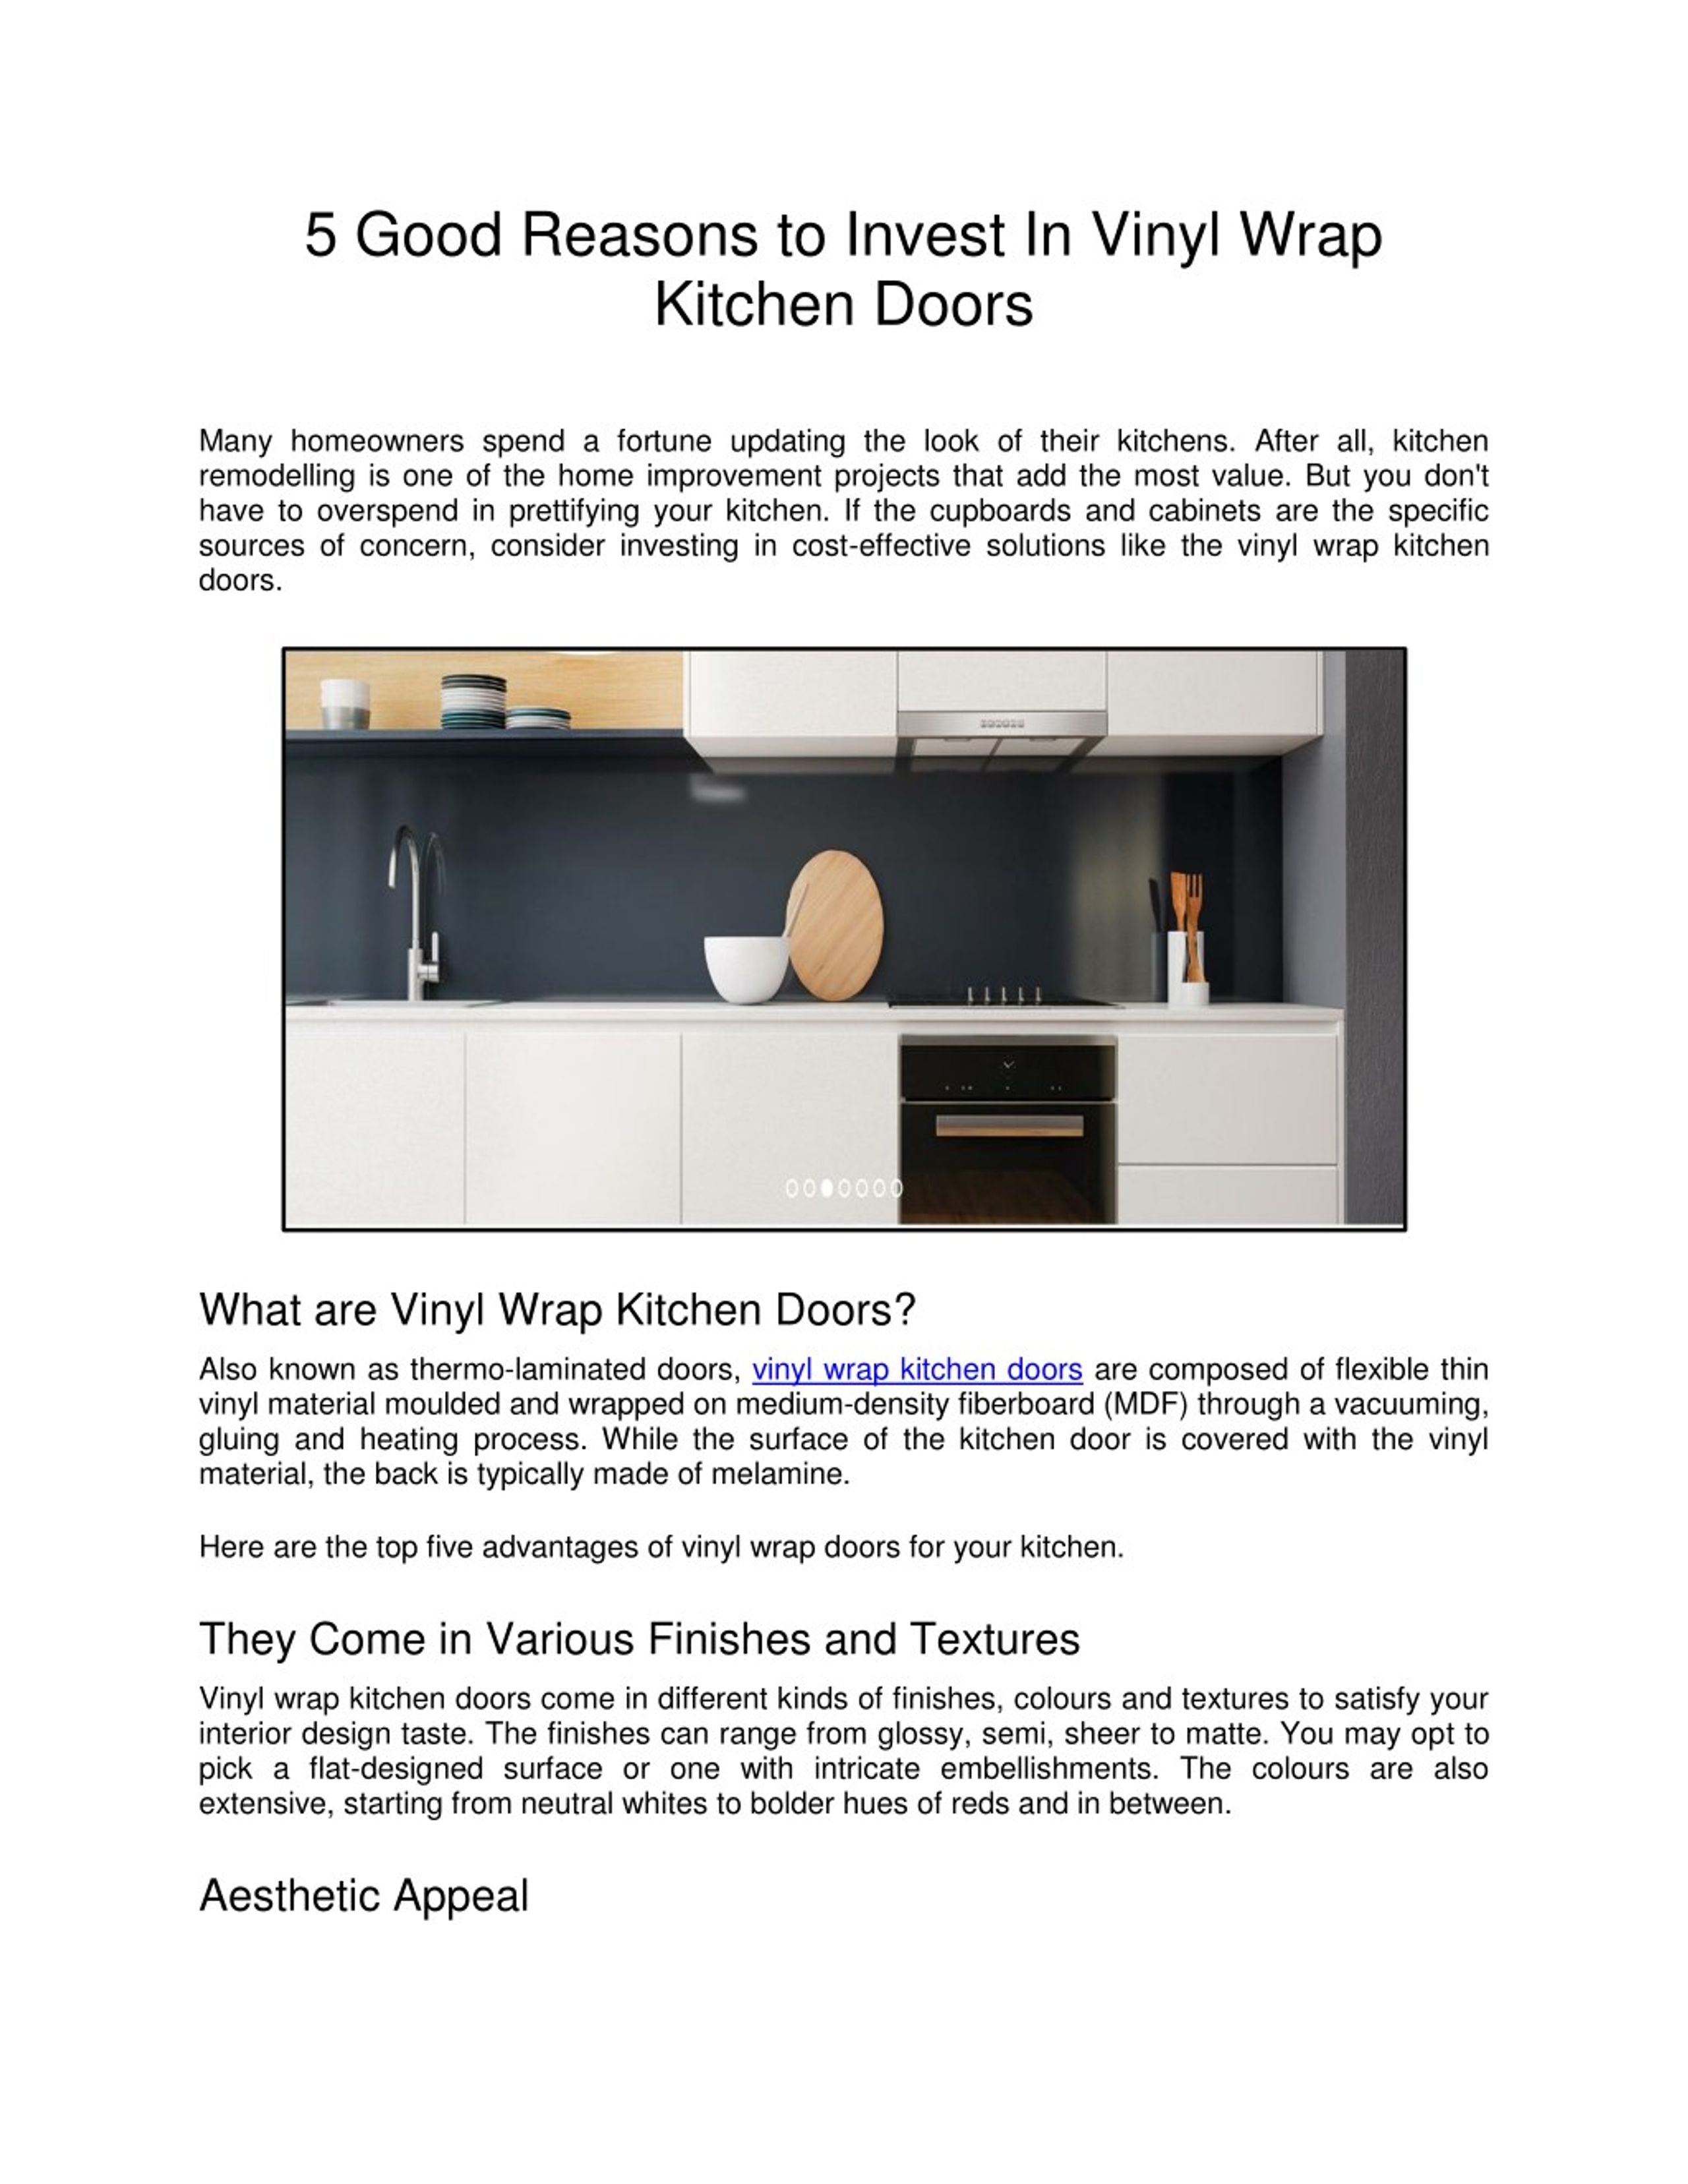 PPT - 5 Good Reasons to Invest In Vinyl Wrap Kitchen Doors PowerPoint  Presentation - ID:7938672